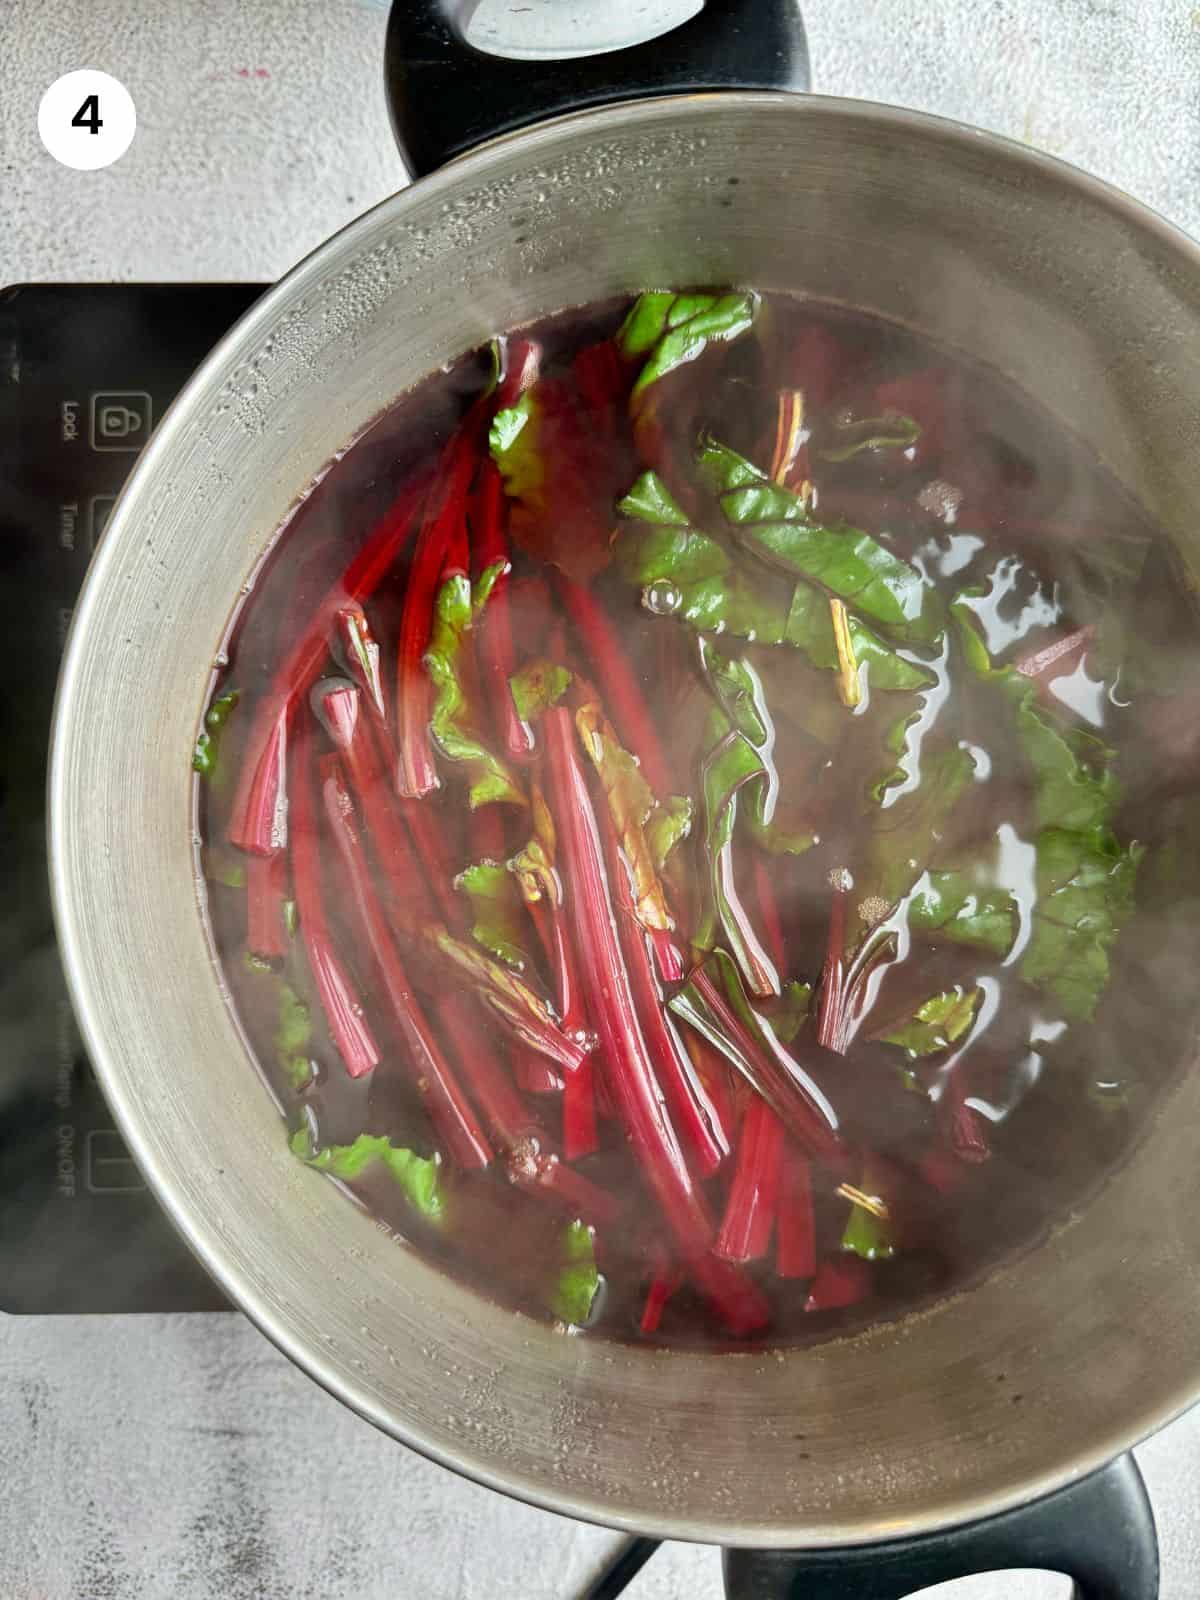 Boiling the beets and leaves until fork tender.